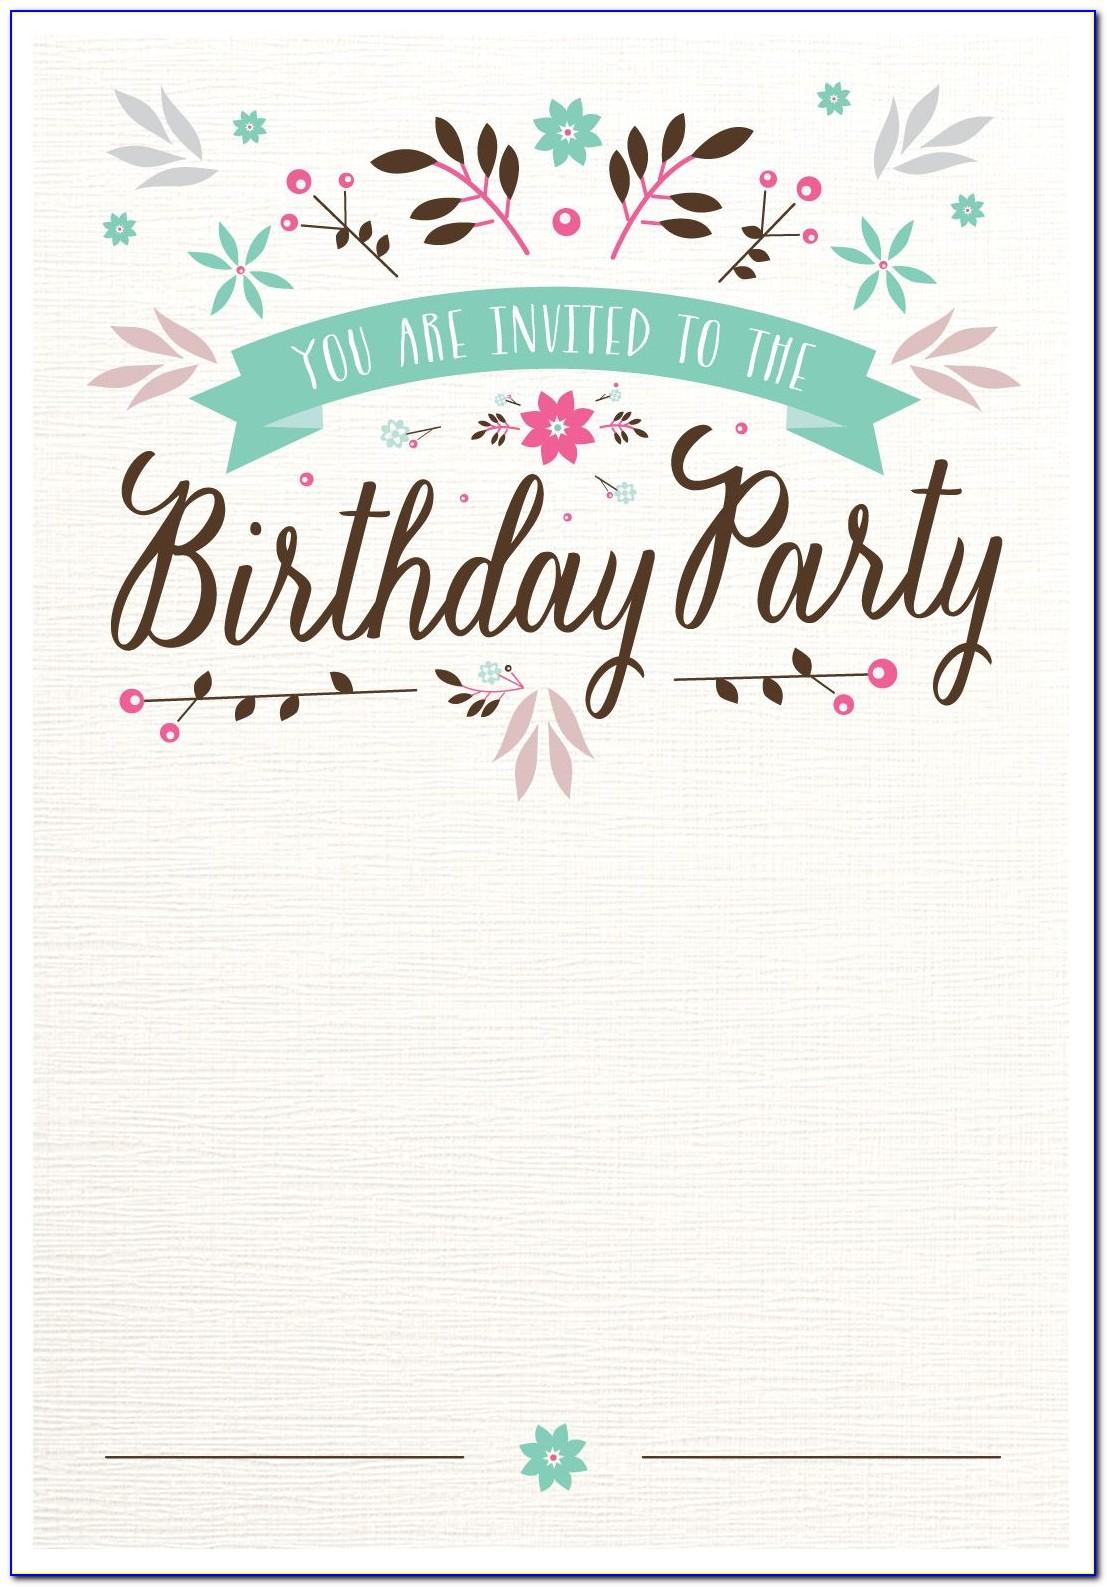 Free Animated Birthday Cards For Granddaughter